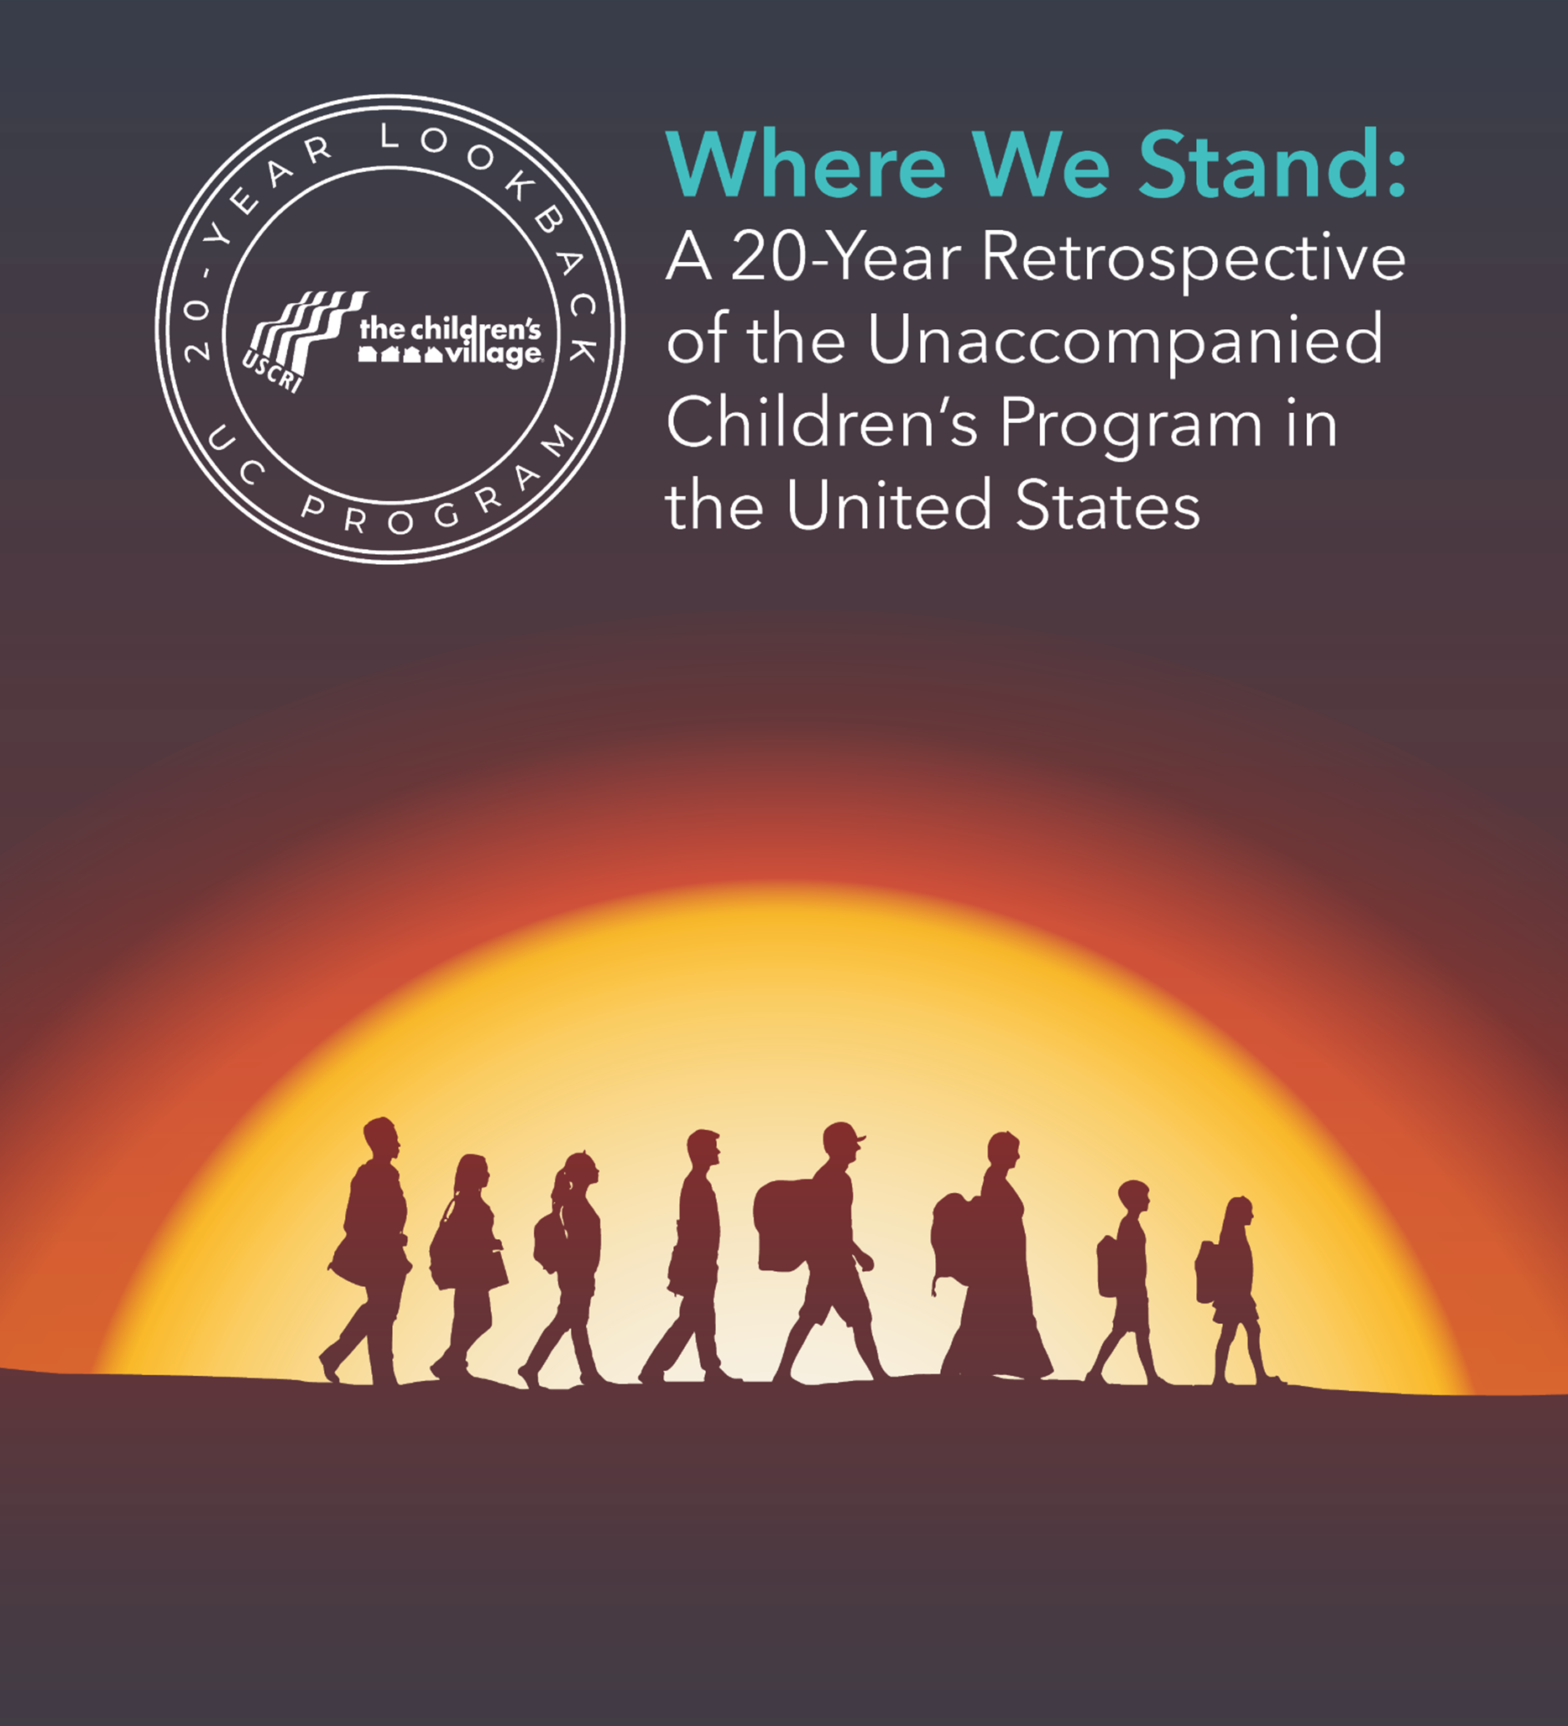 Chapter 1: The Transfer, a 20-Year Retrospective of the Unaccompanied Children’s Program in the U.S.